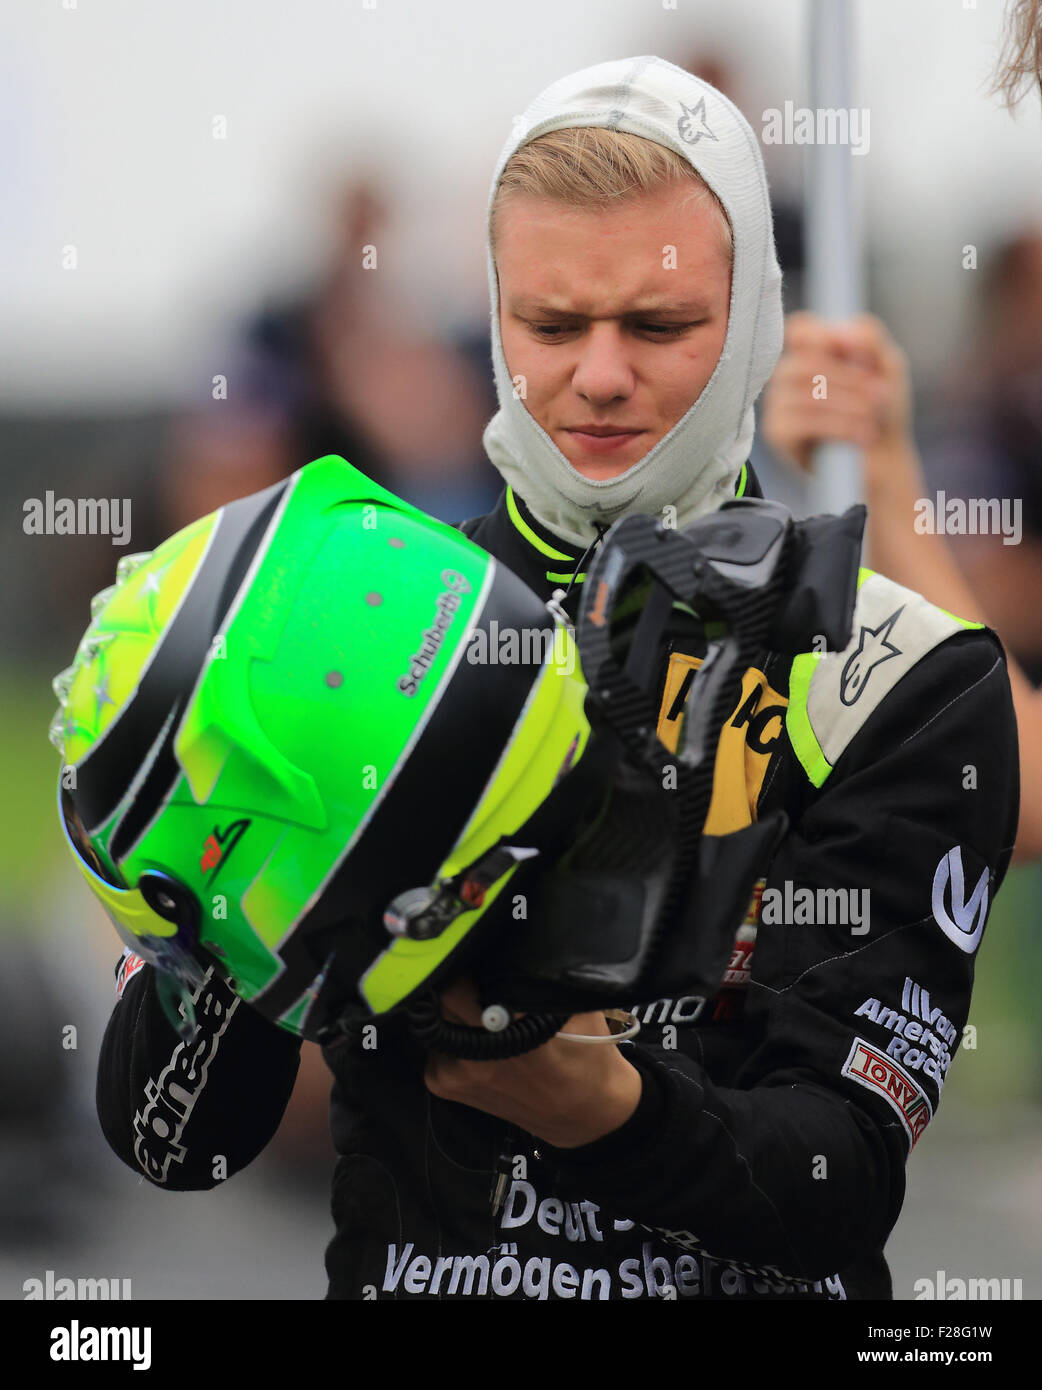 Oschersleben, Germany. 13th Sep, 2015. German Forumla 4 pilot Mick Schumacher of the Dutch team 'Van Amersfoort Racing' prepares for his third run at the ADAC Formula 4 race in Oschersleben, Germany, 13 September 2015. The son of Formula 1 record world champion Michael Schumacher was eliminated after a collission in the third race of the day. Photo: Jens Wolf/dpa/Alamy Live News Stock Photo